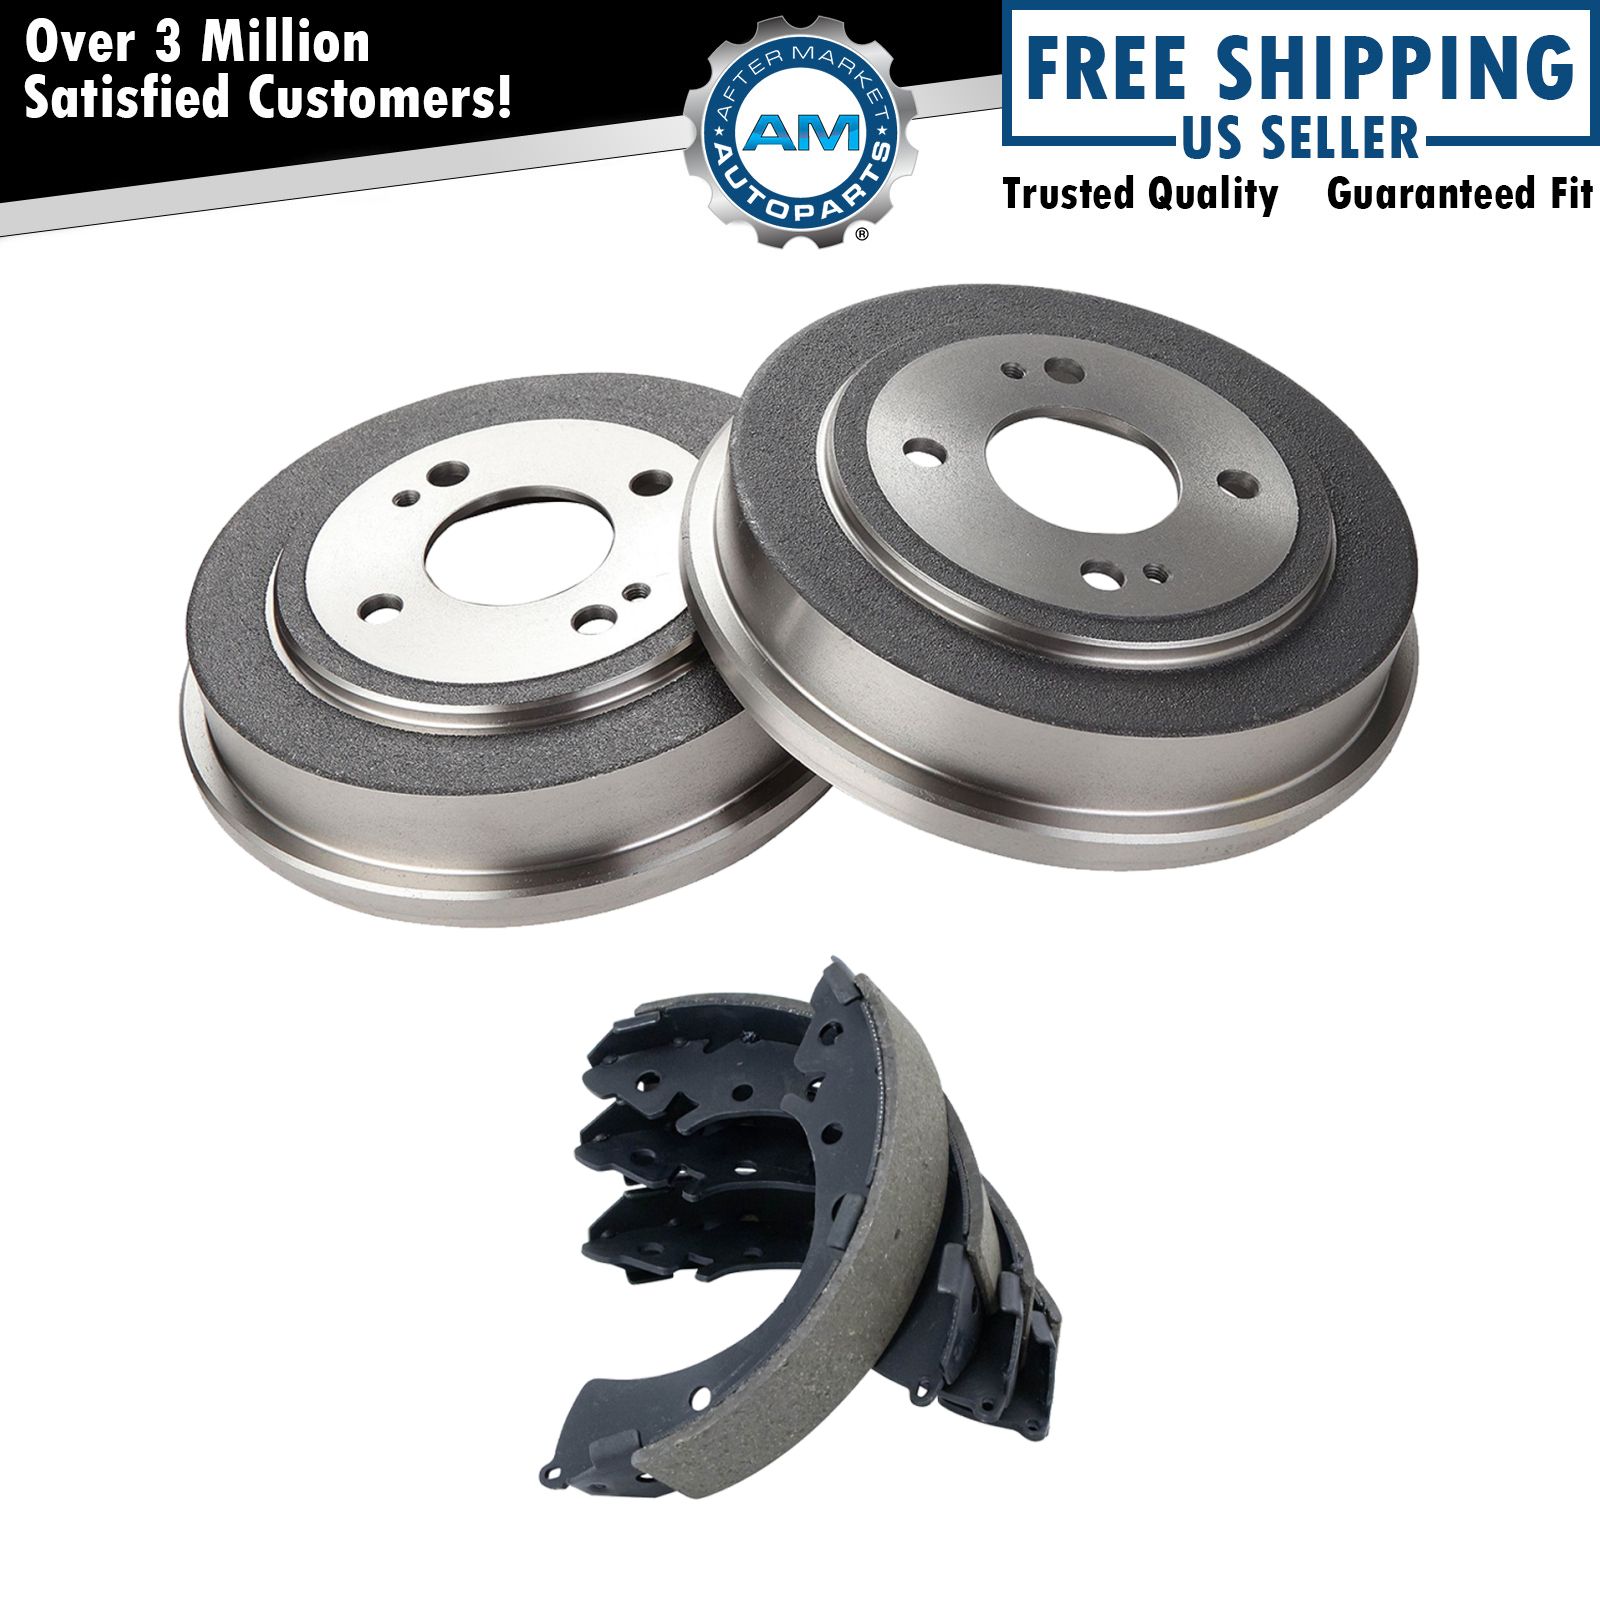 Rear Brake Shoes & 2 Drums Left LH & Right RH Kit for Honda Accord Civic Fit